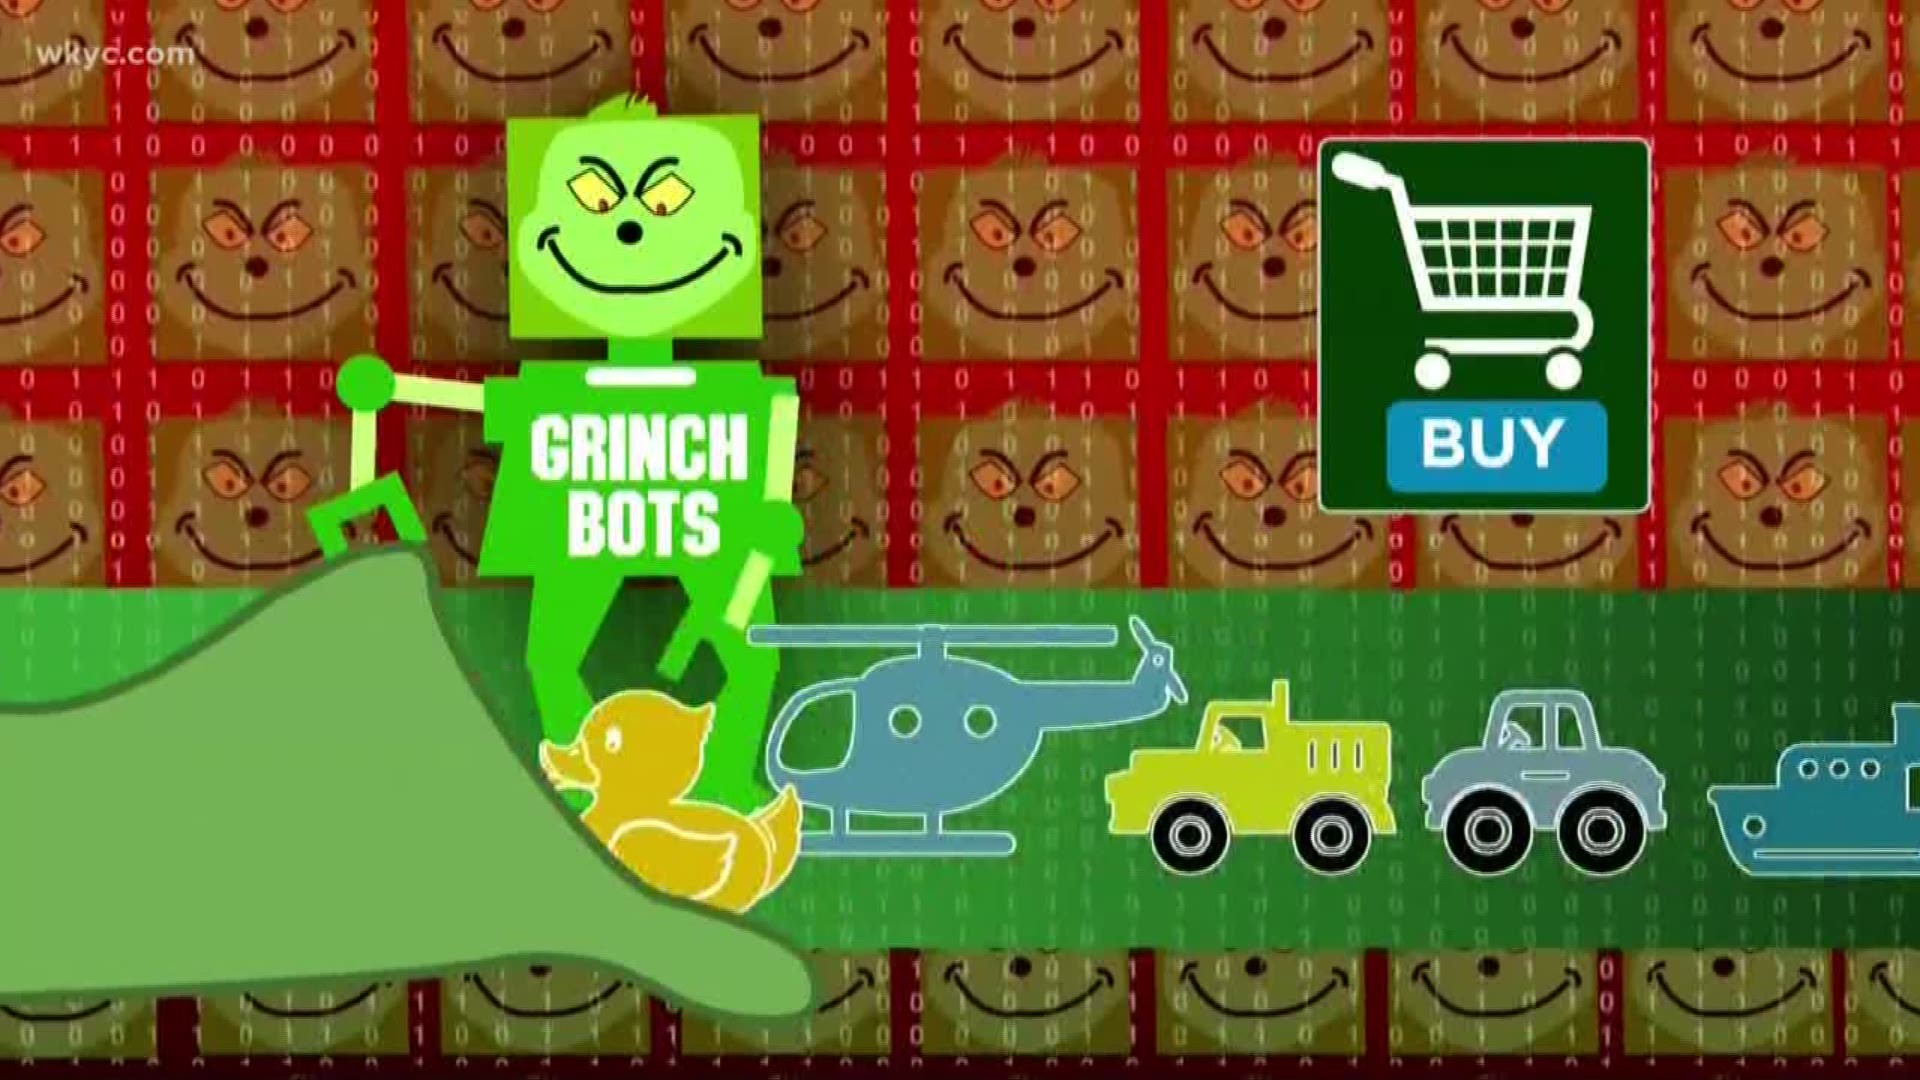 Grinch bots: Not new, but still ripping parents off this Christmas season